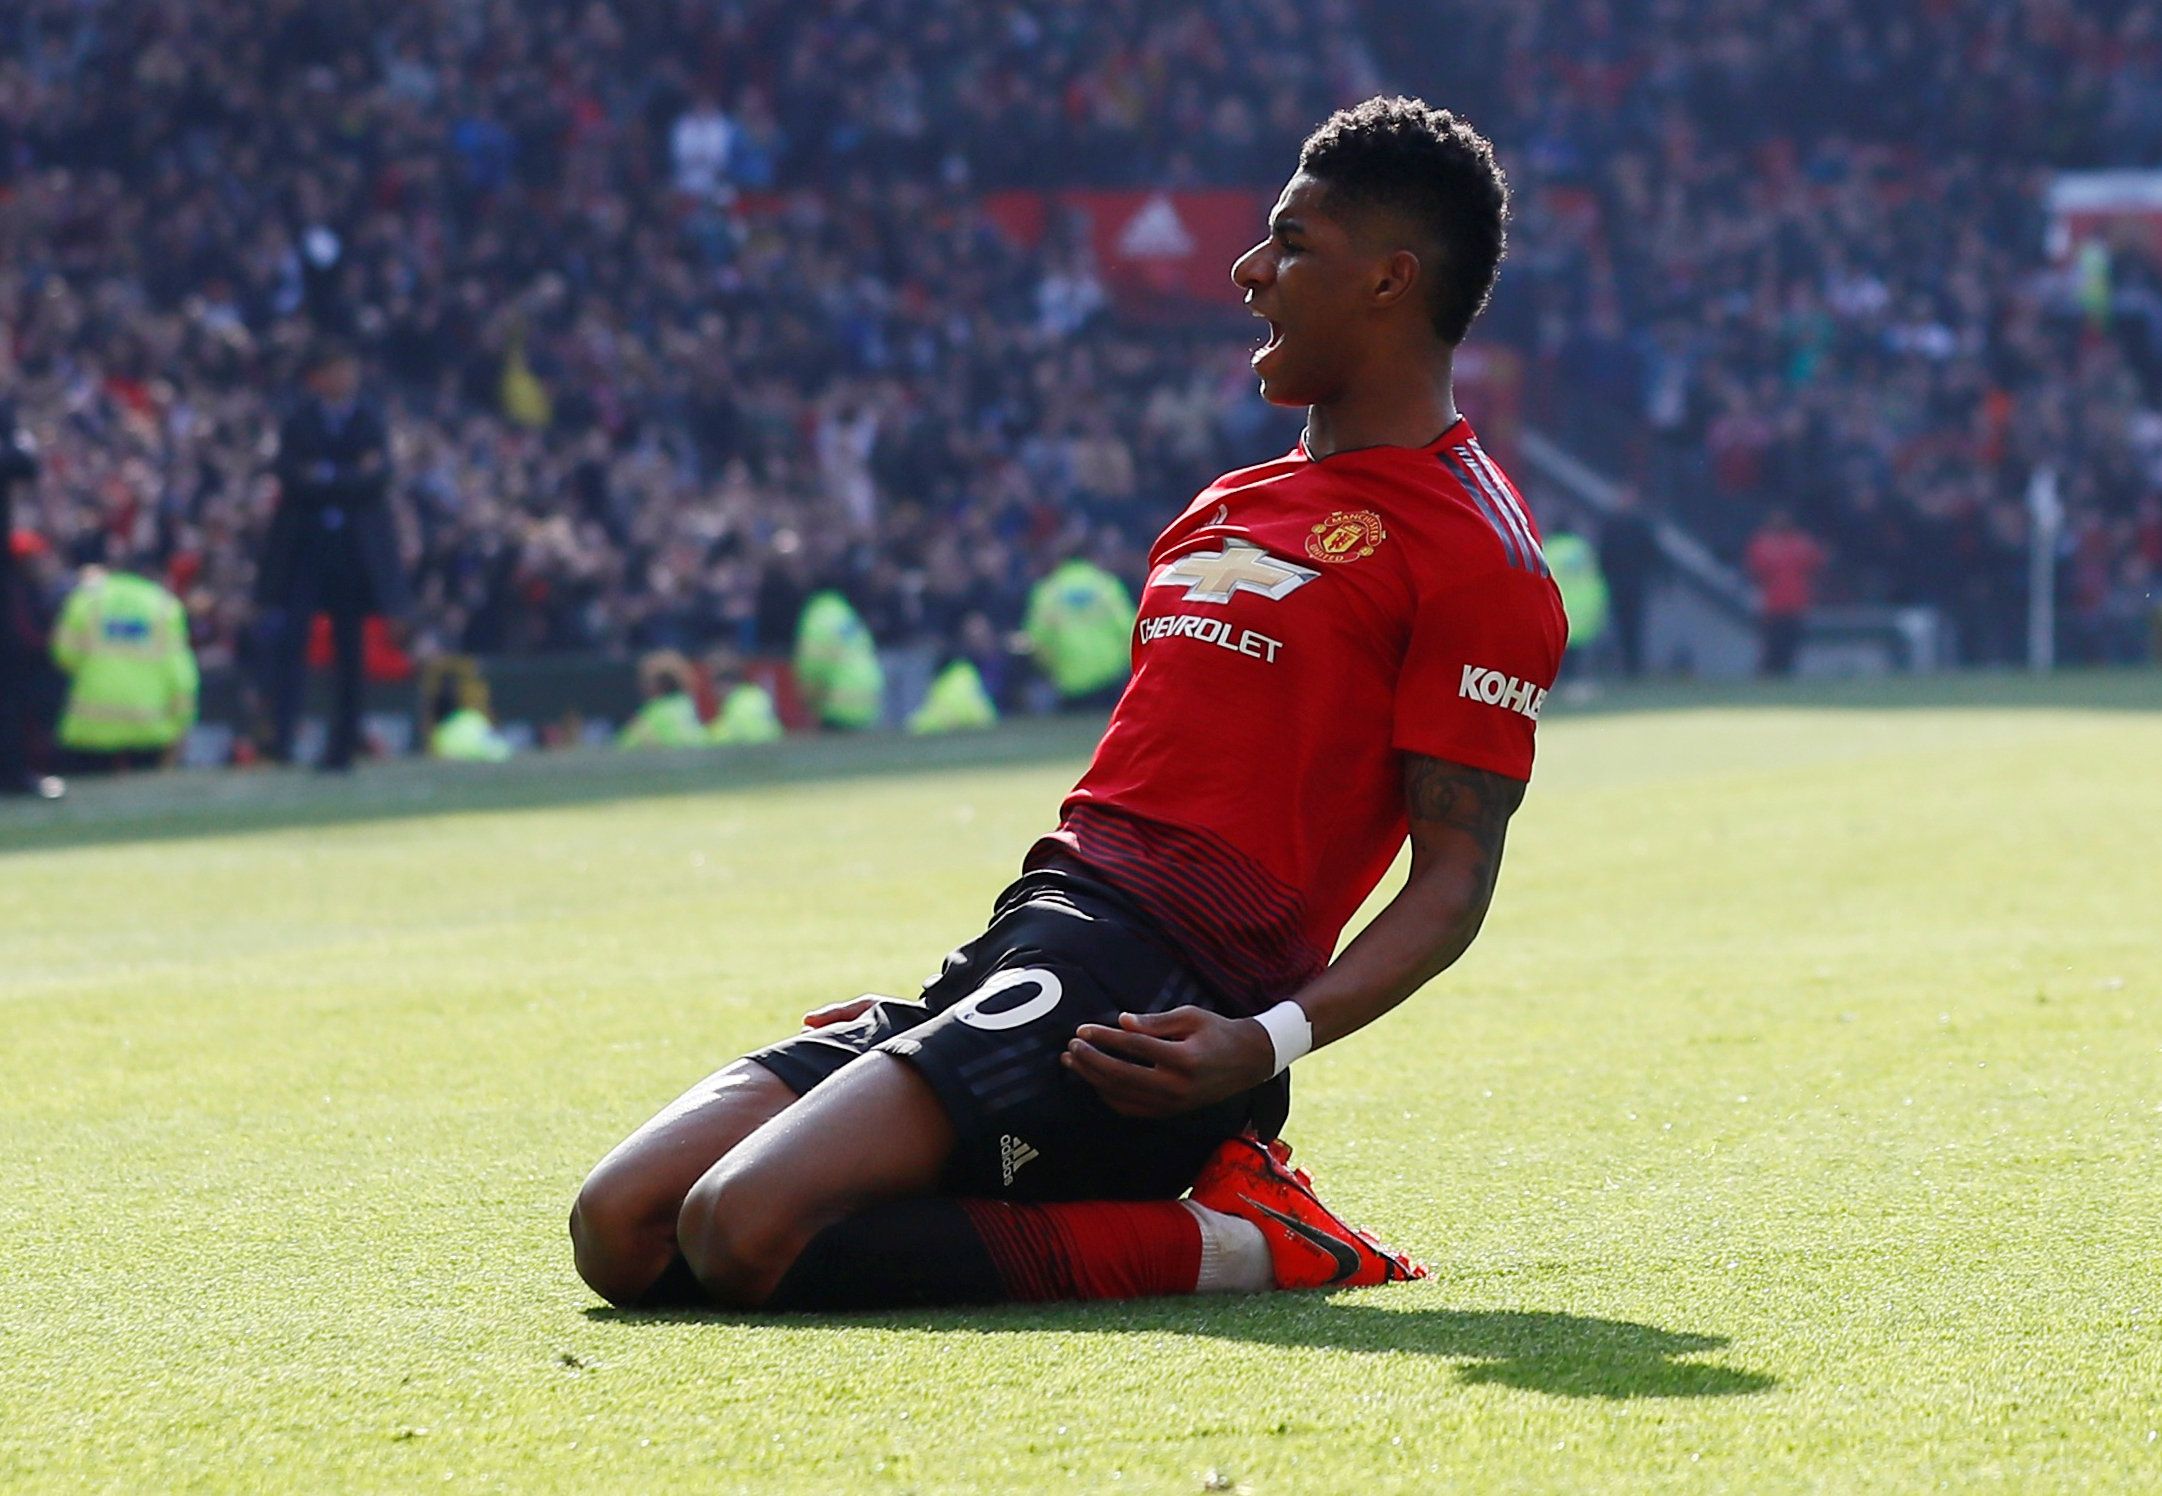 Soccer Football - Premier League - Manchester United v Watford - Old Trafford, Manchester, Britain - March 30, 2019  Manchester United's Marcus Rashford celebrates scoring their first goal            Action Images via Reuters/Jason Cairnduff  EDITORIAL USE ONLY. No use with unauthorized audio, video, data, fixture lists, club/league logos or "live" services. Online in-match use limited to 75 images, no video emulation. No use in betting, games or single club/league/player publications.  Please c